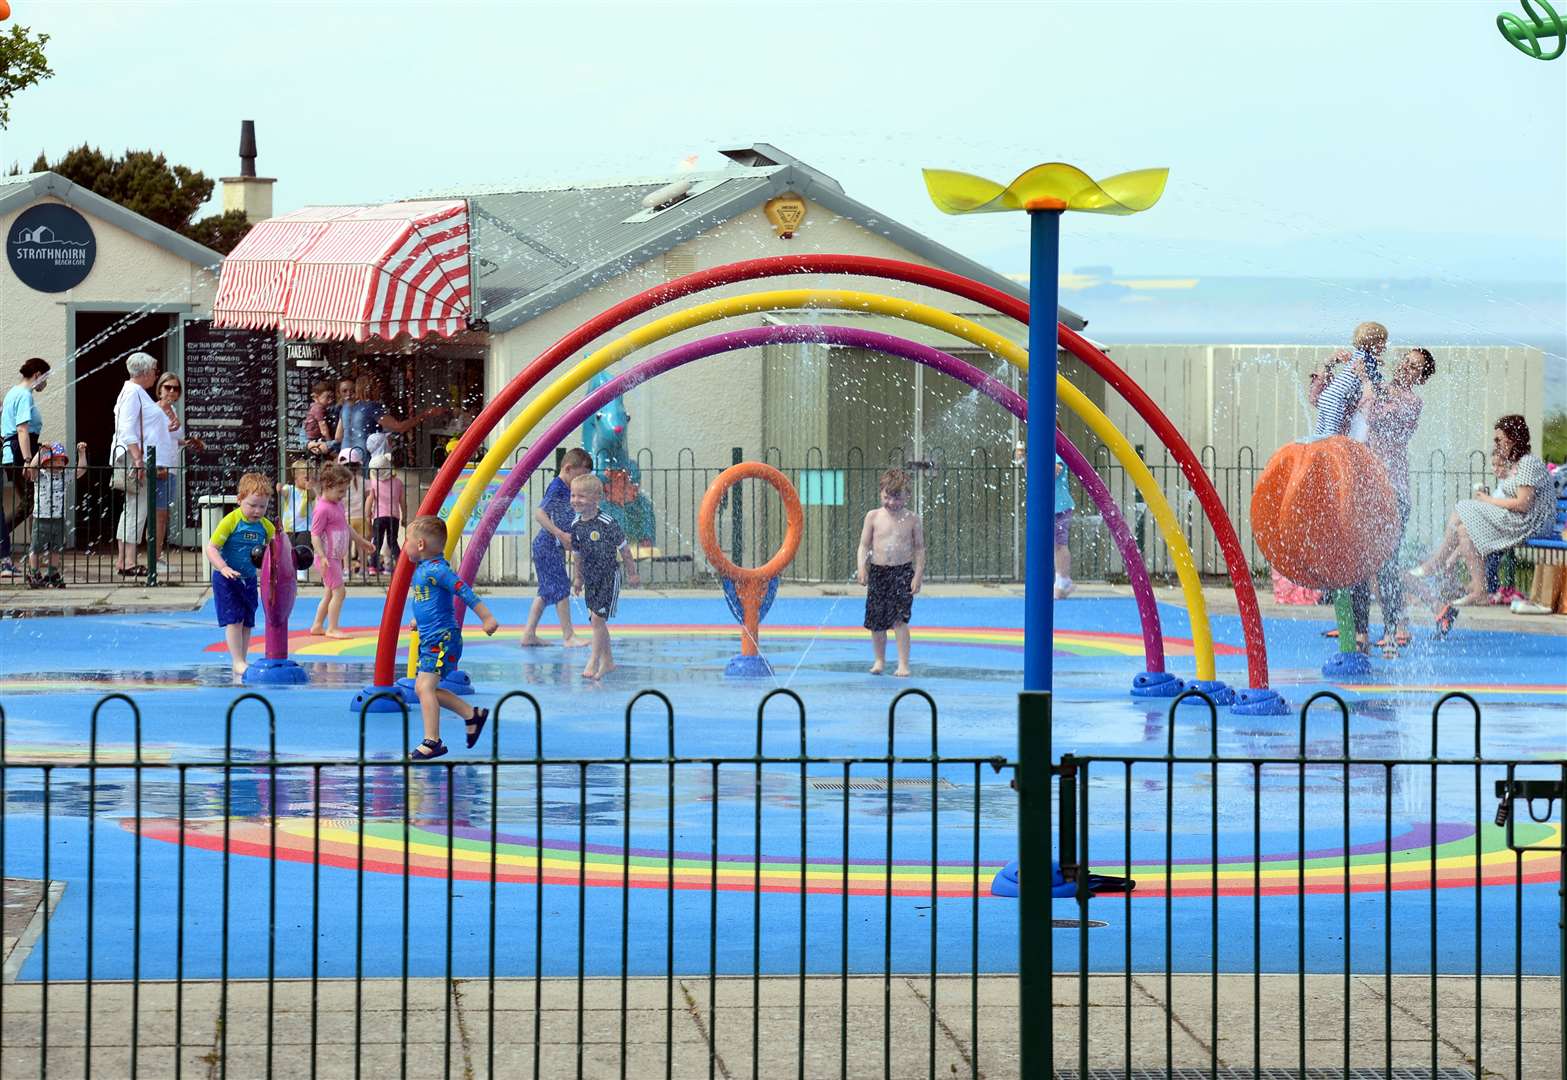 The splash pad was funded by the Team Hamish appeal.